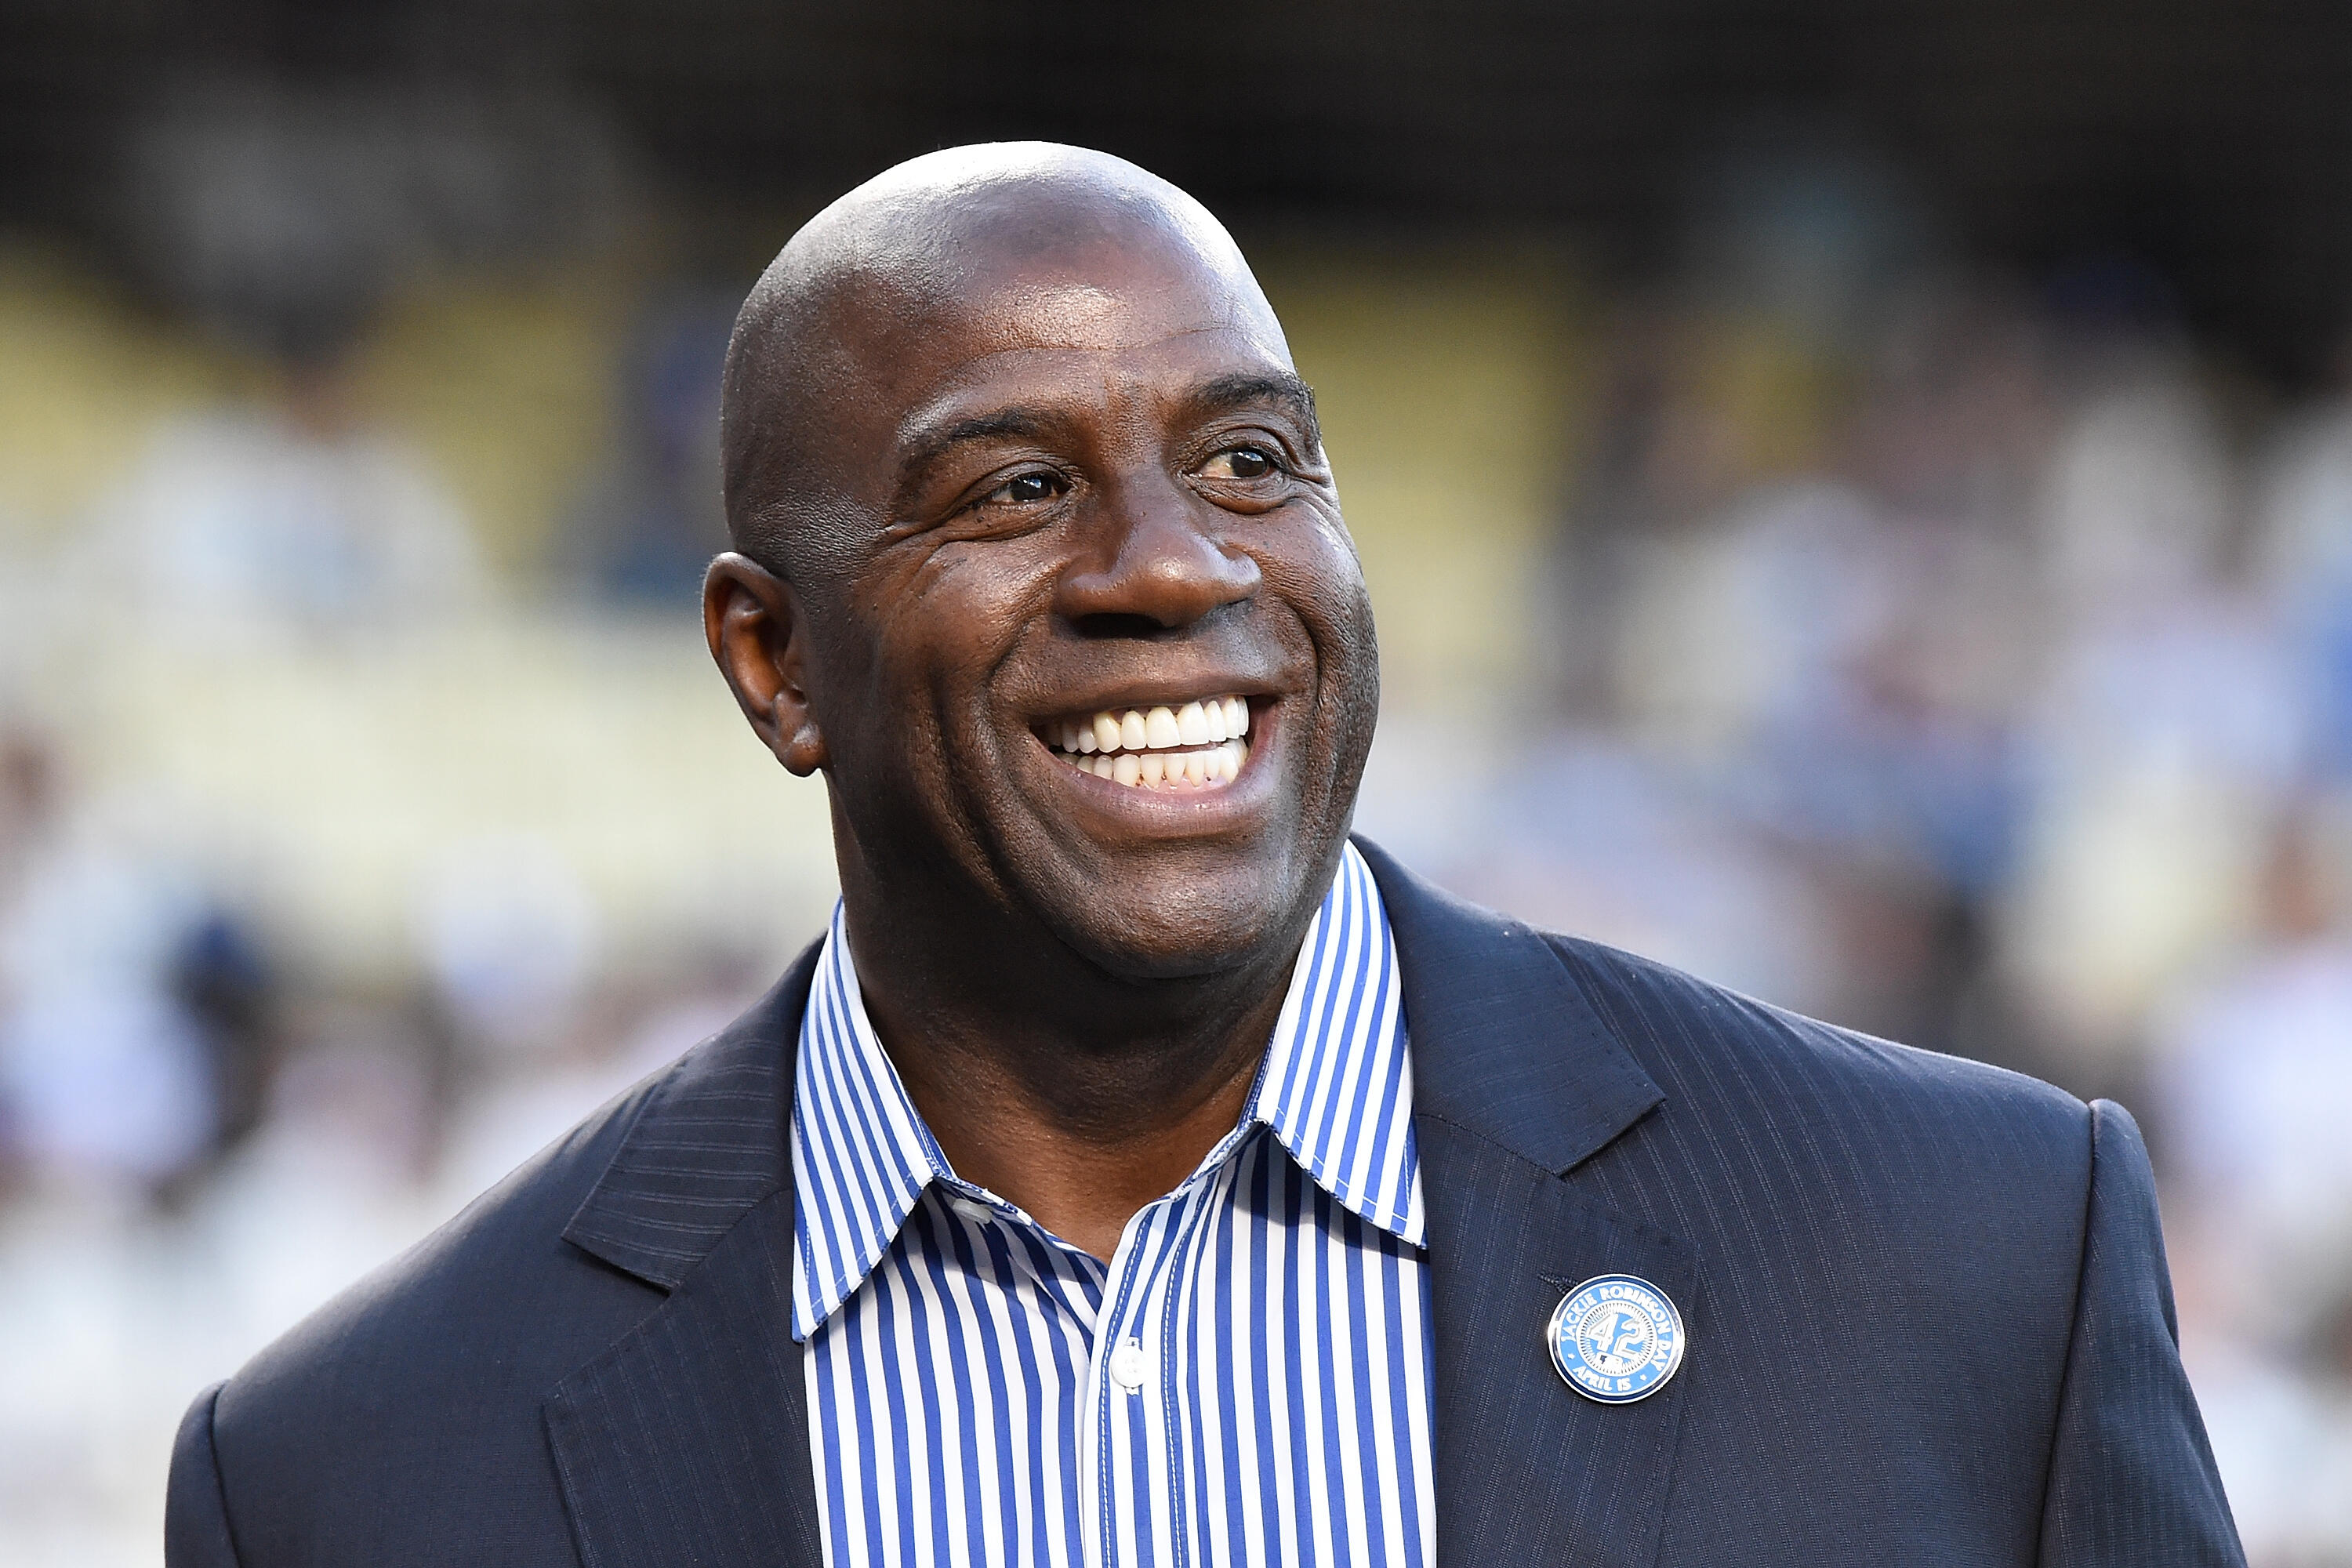 LOS ANGELES, CA - APRIL 15:  Magic Johnson attends a ceremony honoring Jackie Robinson before the game between the San Francisco Giants and the Los Angeles Dodgers at Dodger Stadium on April 15, 2016 in Los Angeles, California.  All players are wearing #4